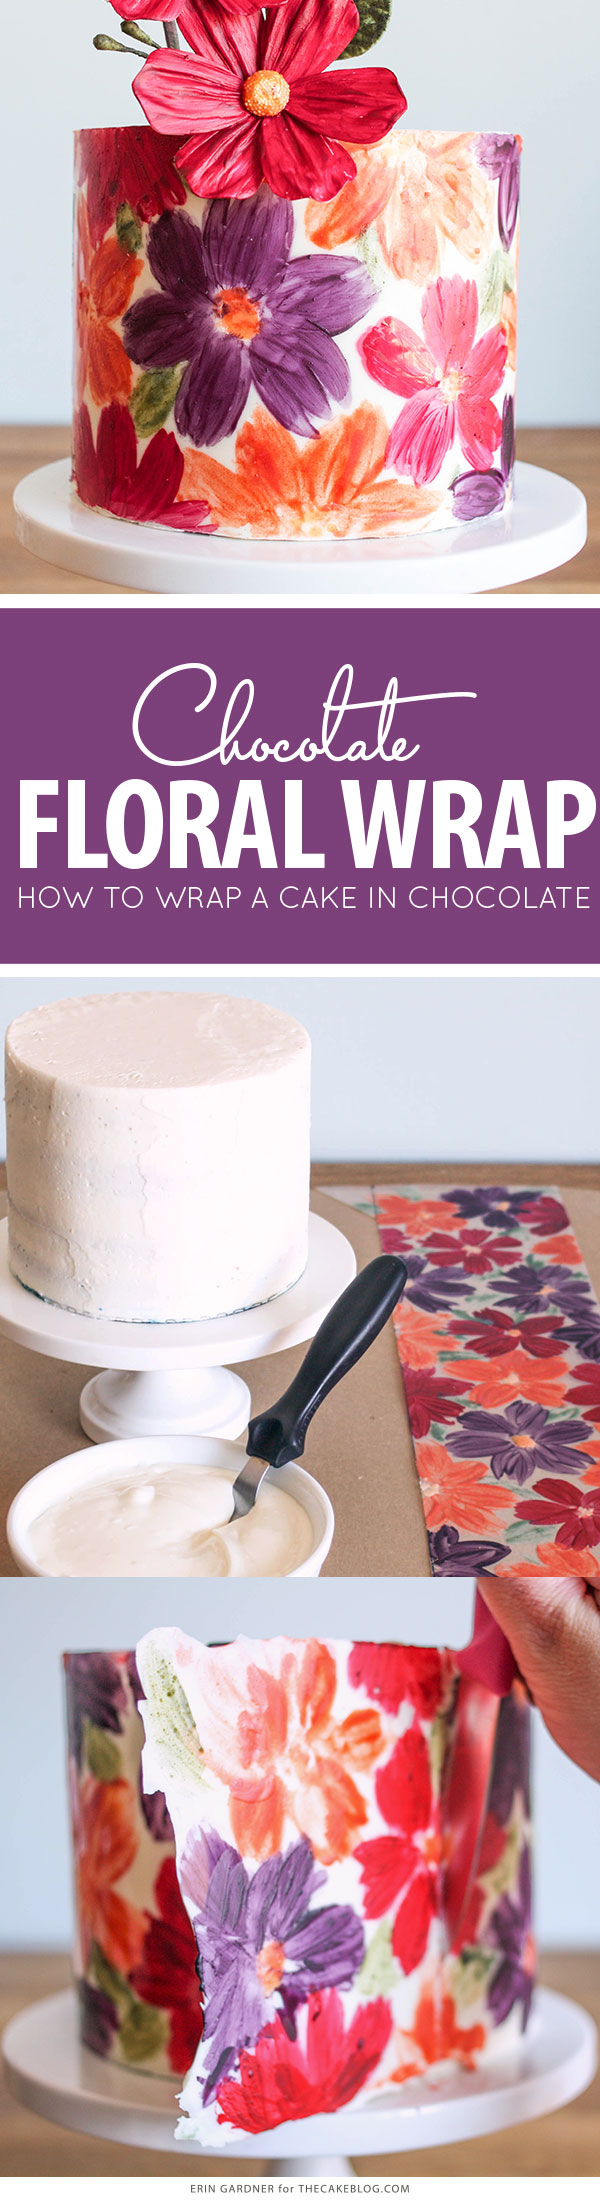 Chocolate Wrapped Cake | by Erin Gardner for TheCakeBlog.com